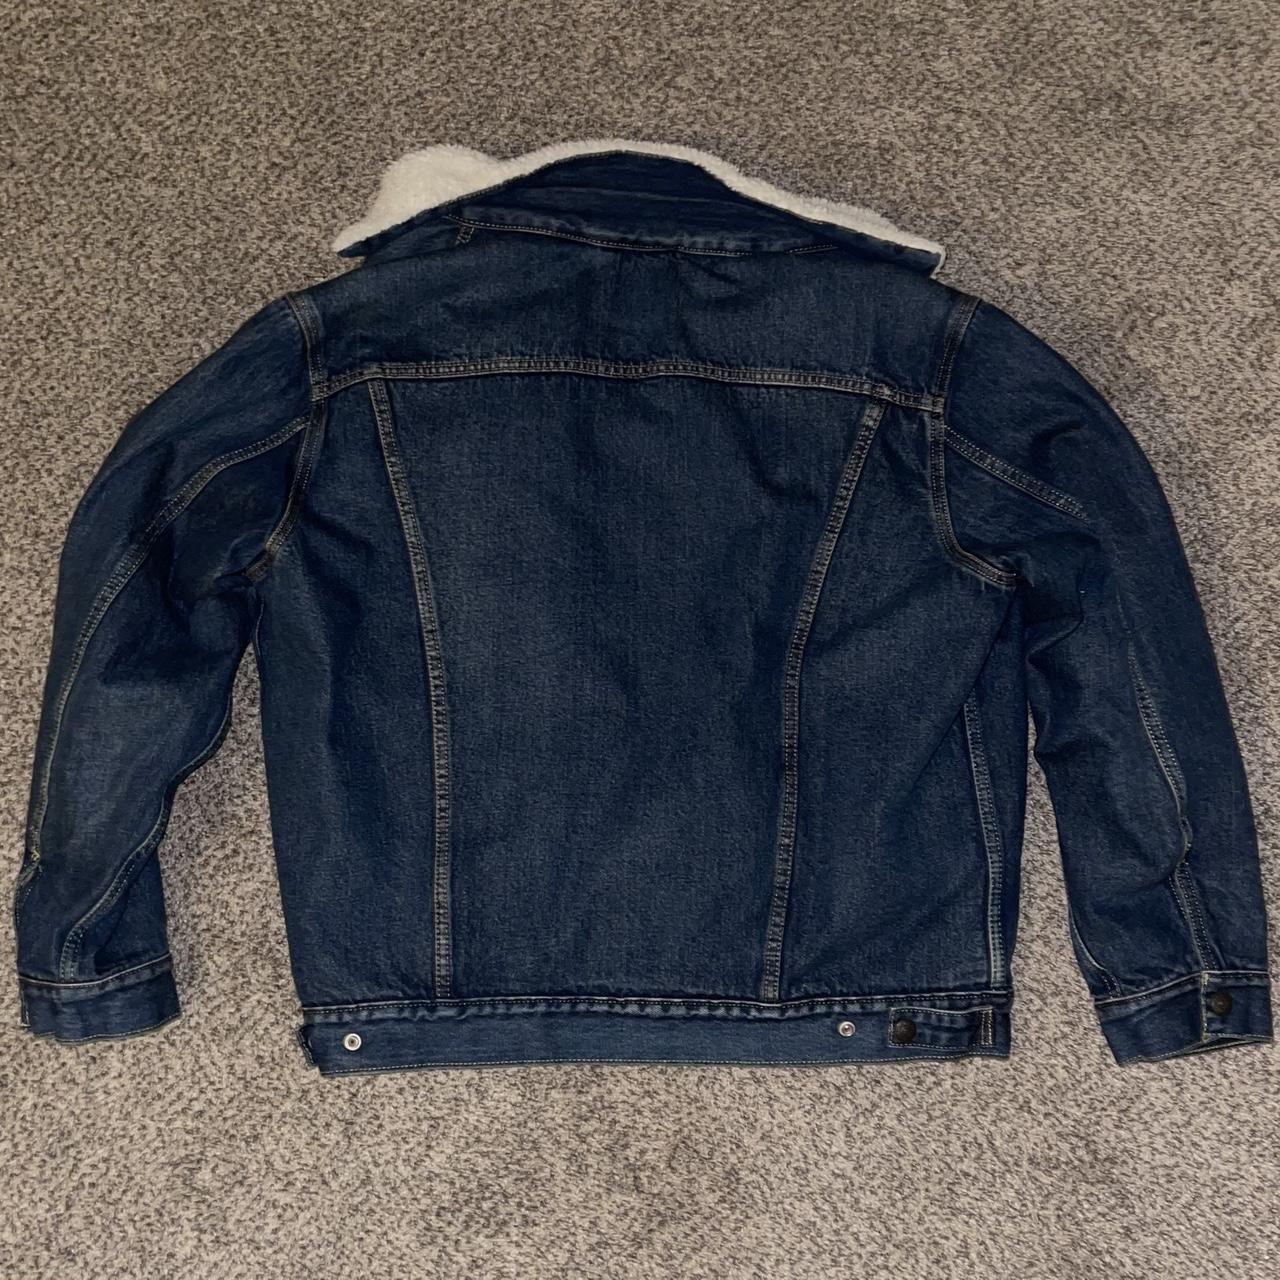 Levi's sherpa lined denim jacket with inner chest... - Depop